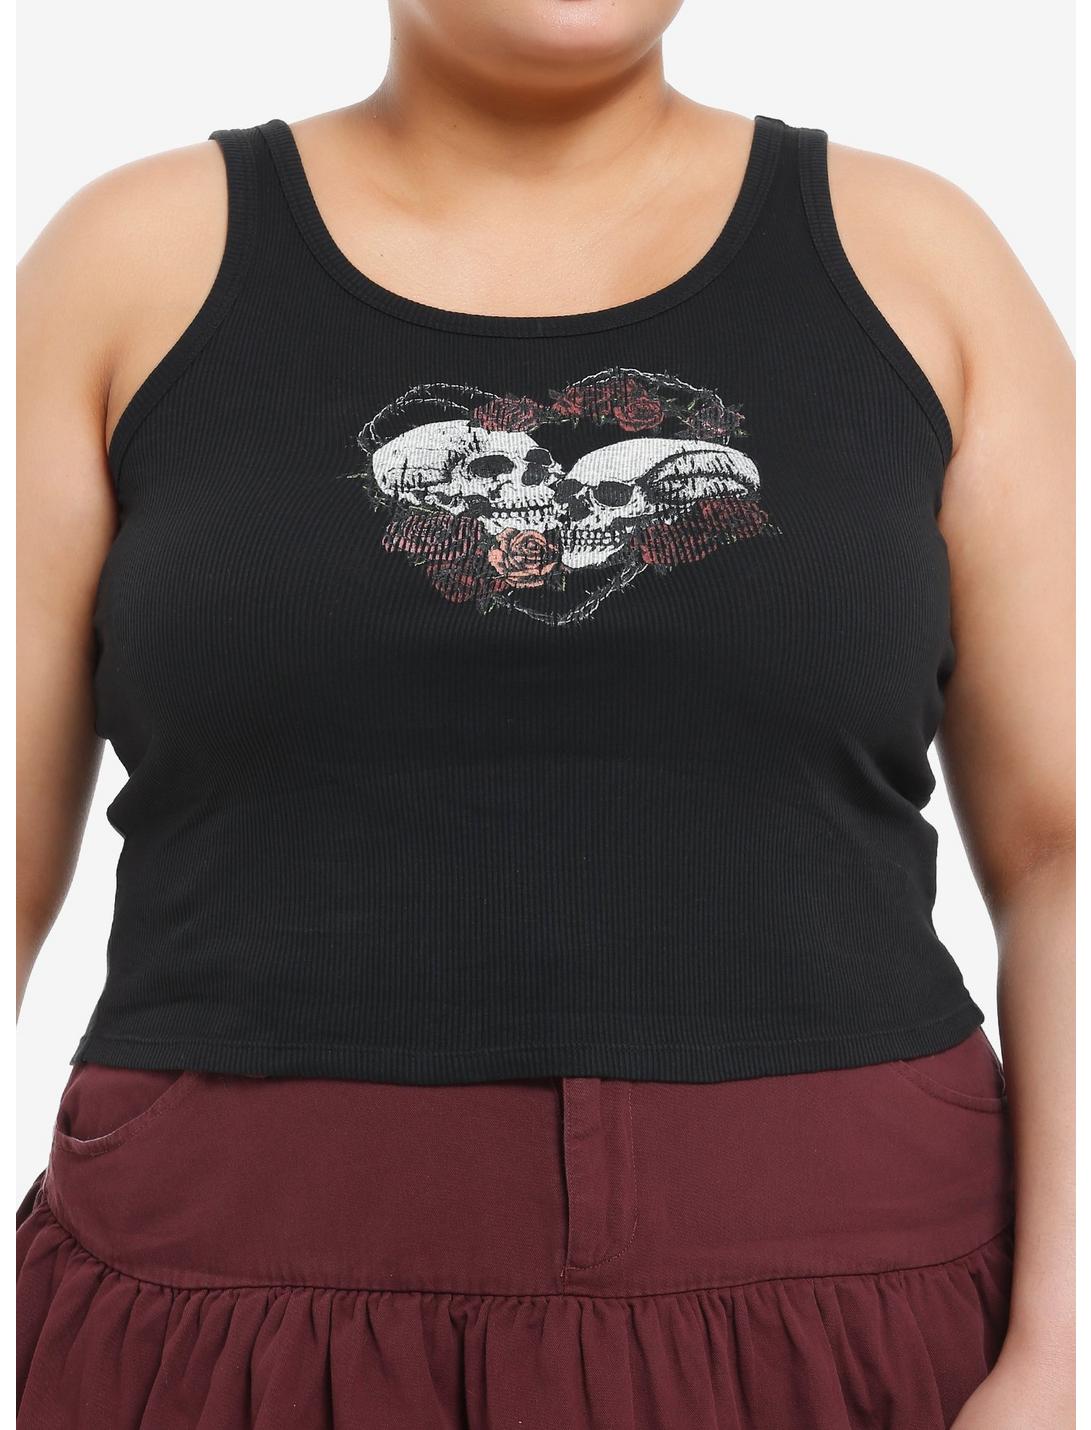 Social Collision Skull Heart Roses Girls Tank Top Plus Size, RED, hi-res